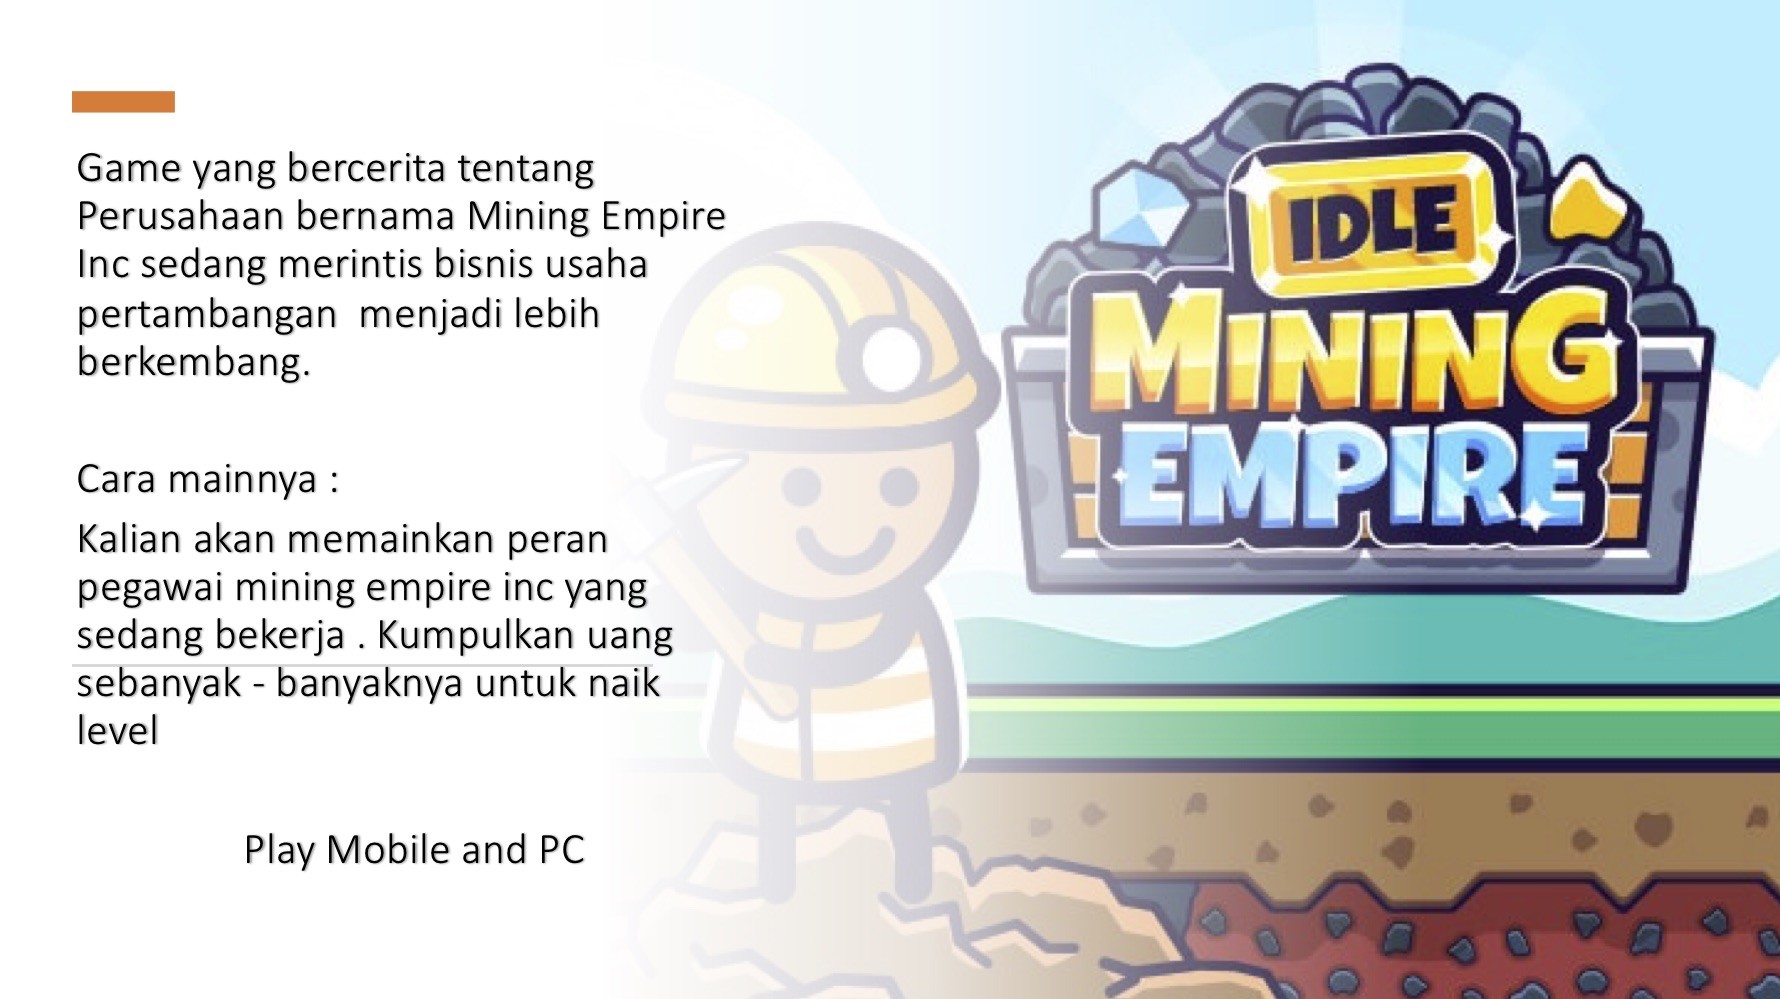 https://www.crazygames.com/game/idle-mining-empire